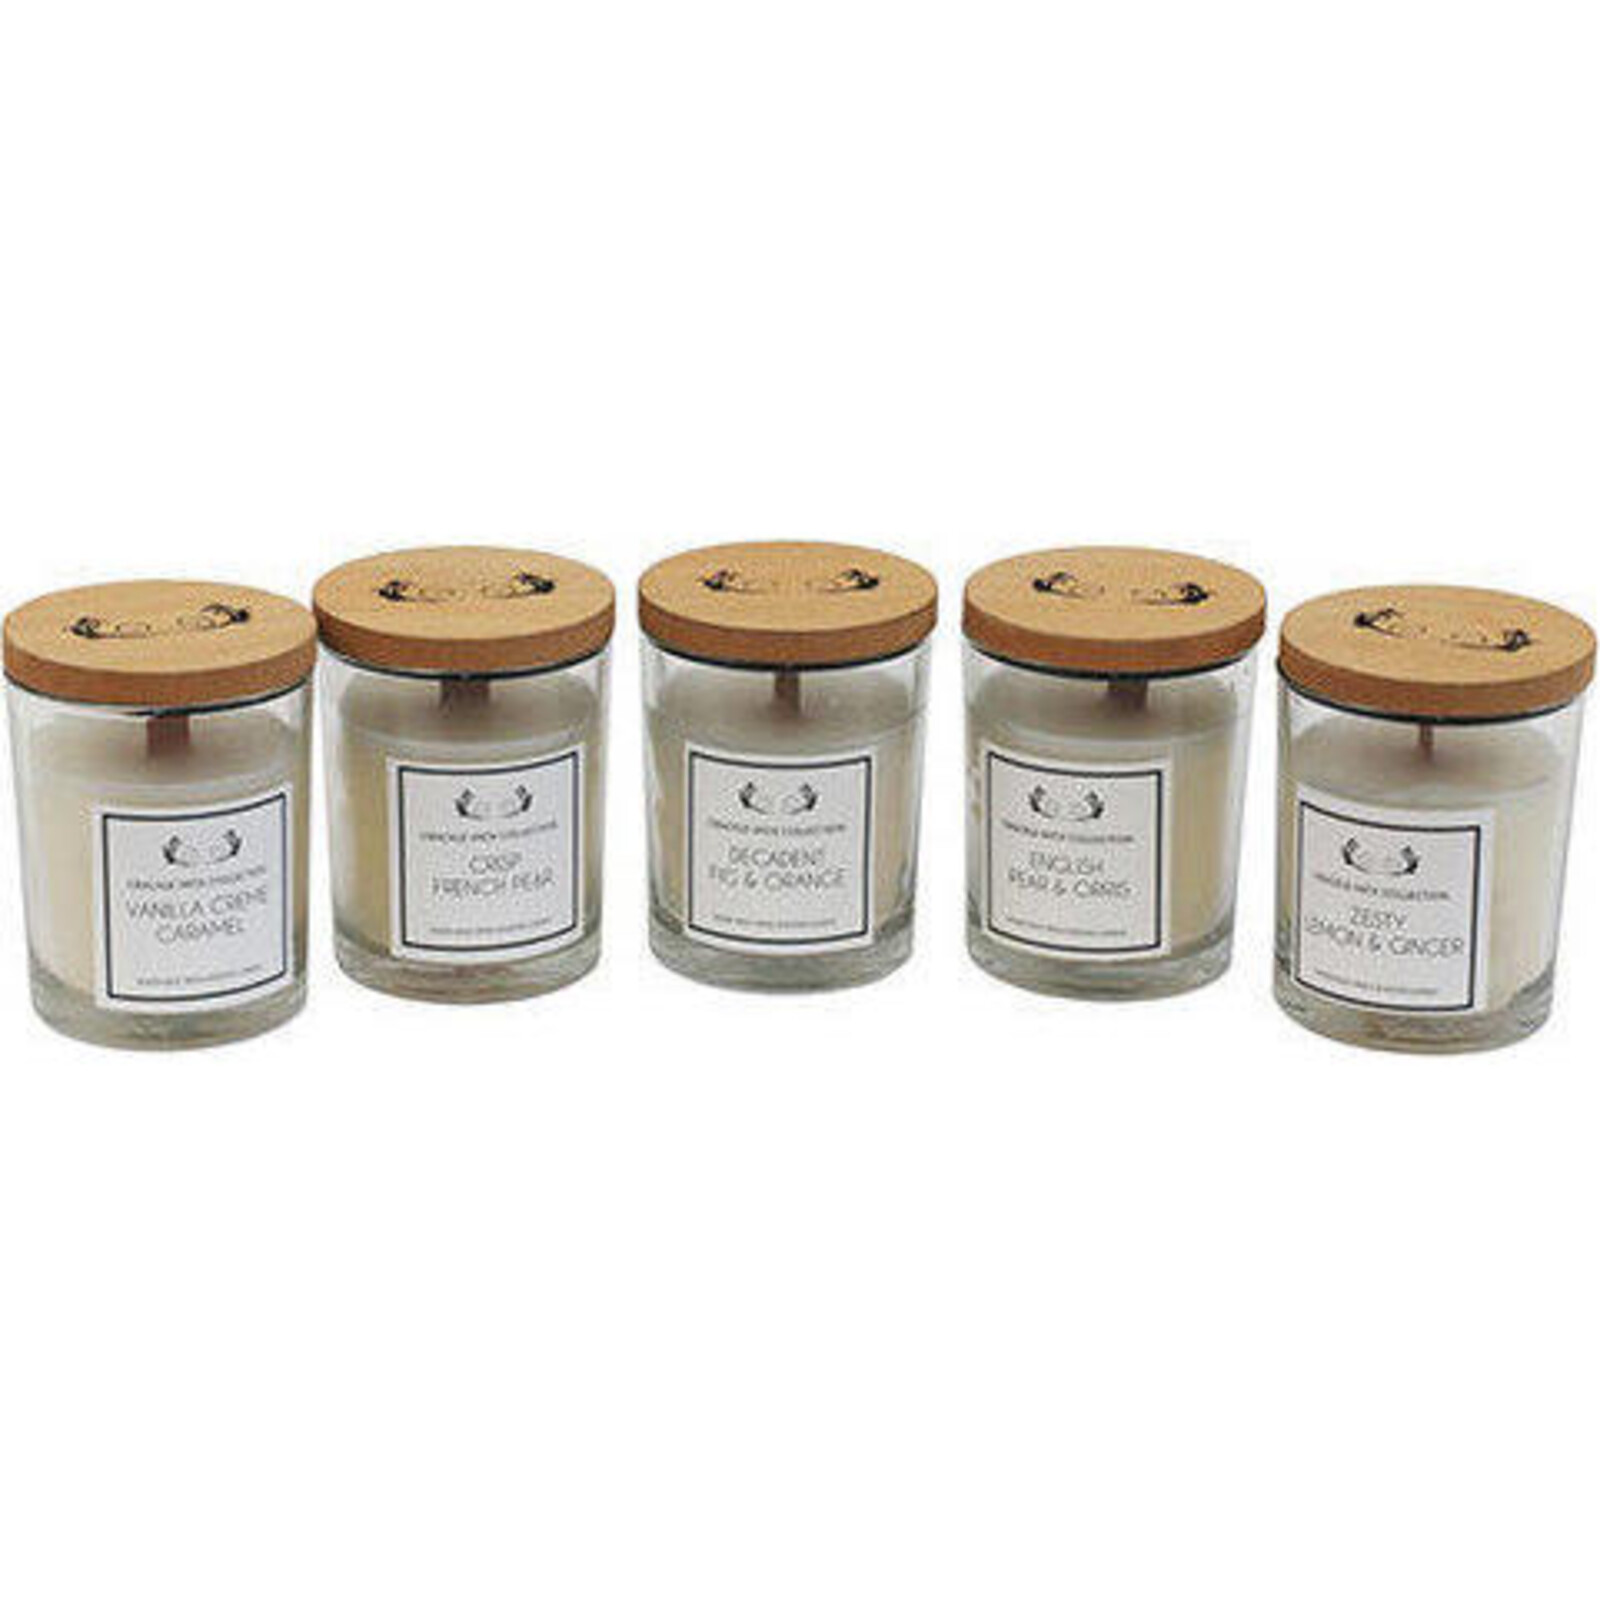 Candle Crackle Wick English Pear